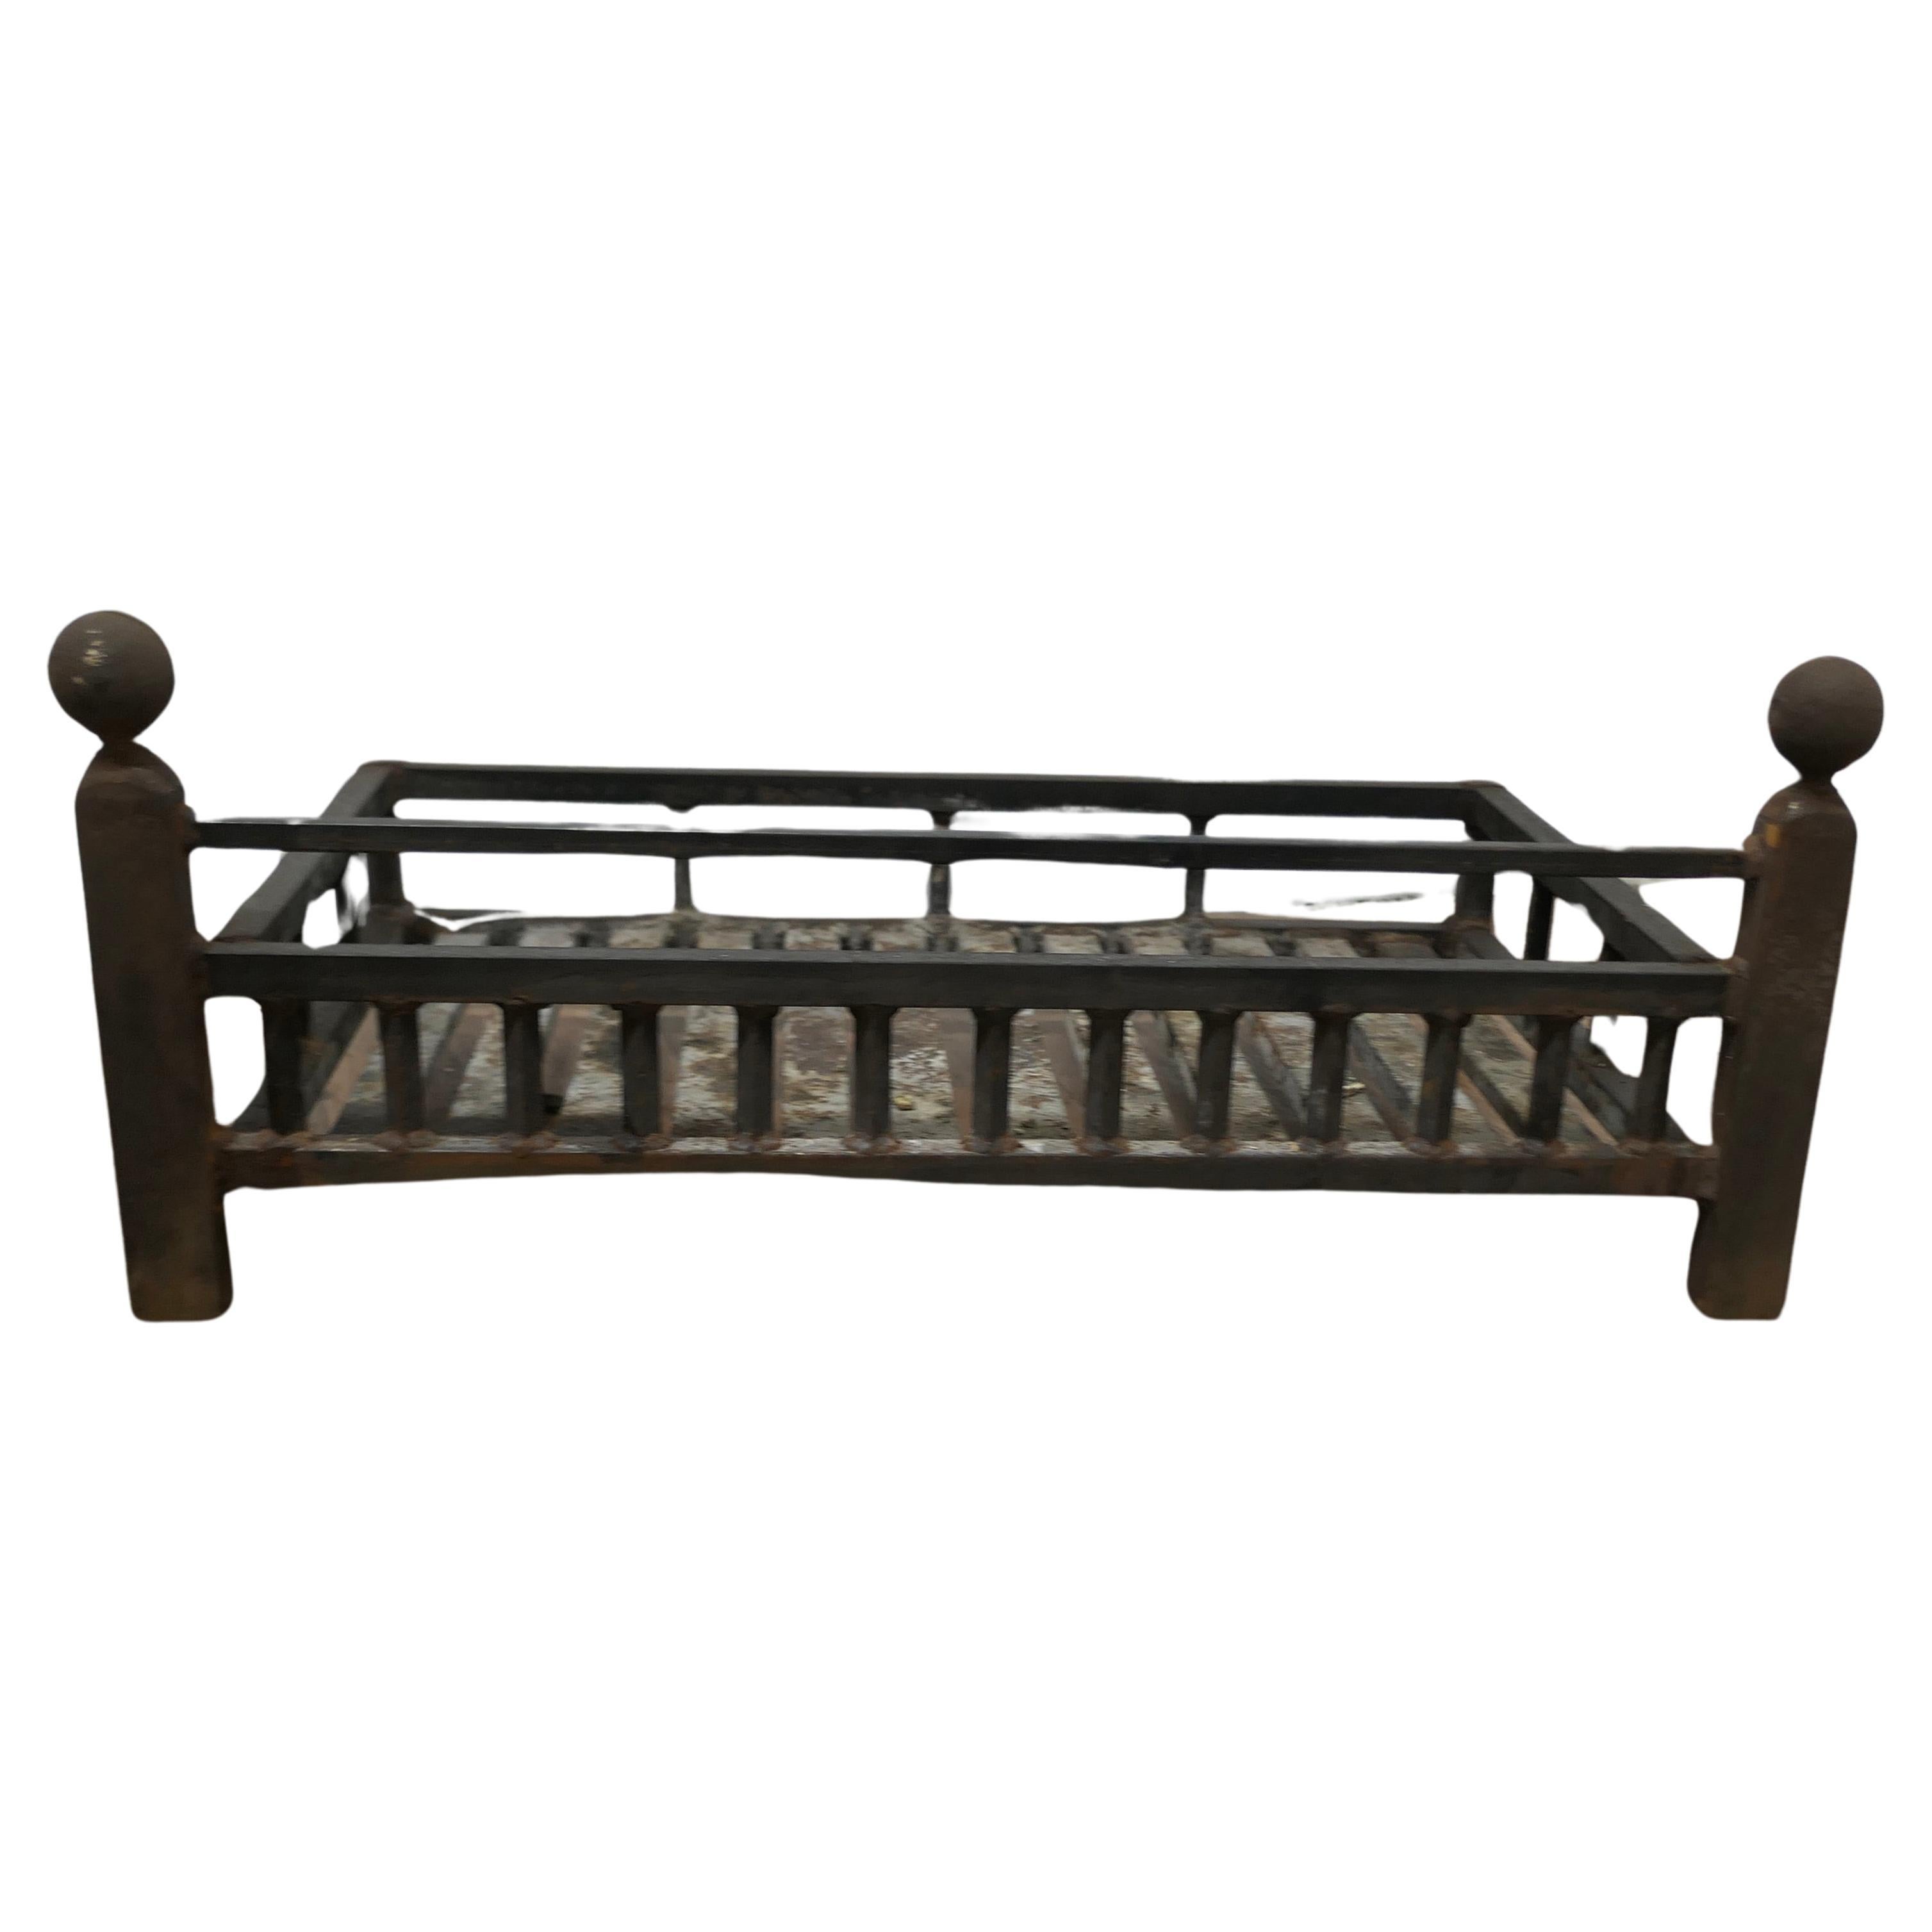 Inglenook Iron Fire Grate    The grate is made in iron with rails all around 